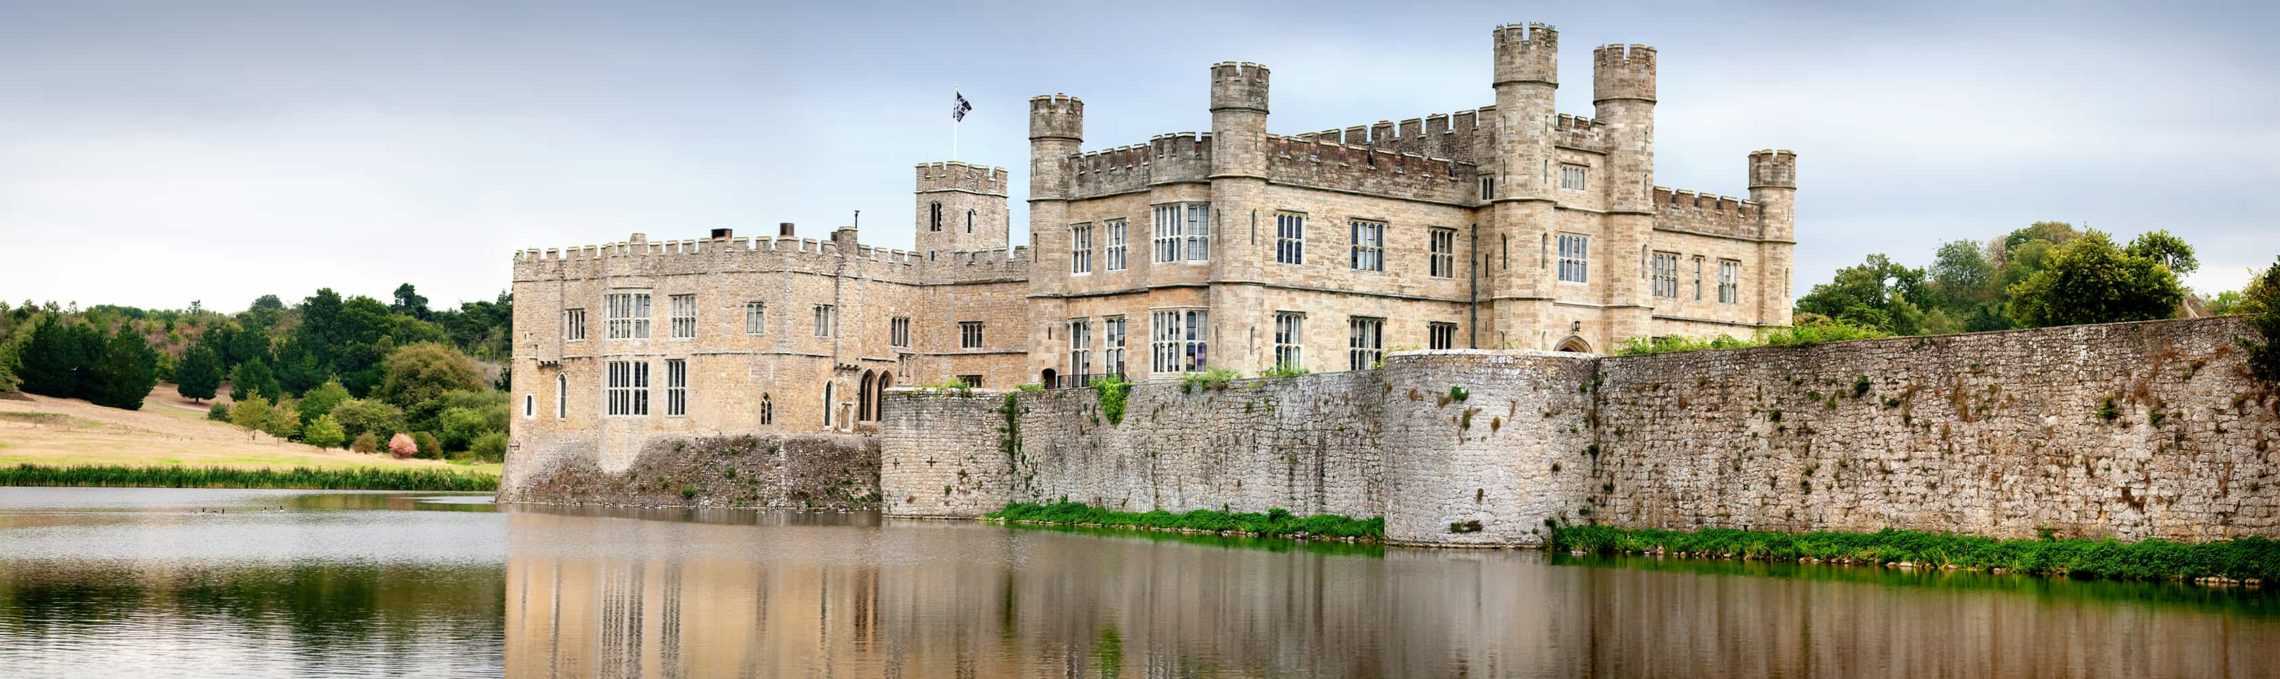 Credential Guard is like storing treasures in a castle that’s protected by an imposing mote and gatehouse.